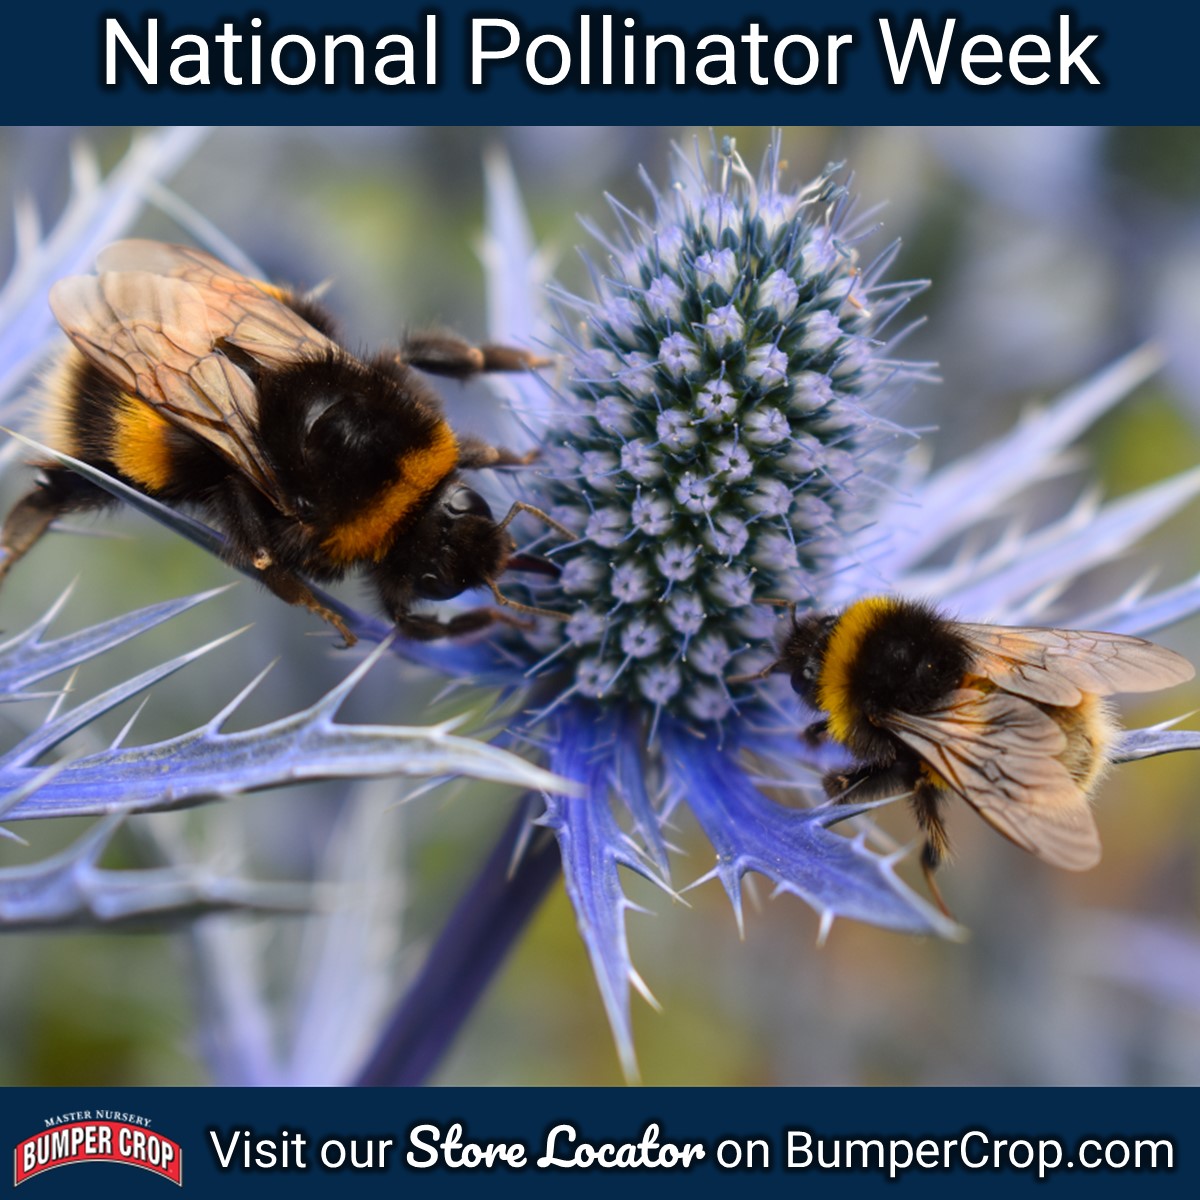 Happy National Pollinator Week! Let’s celebrate our pollinators by planting more pollinator gardens and by using organic products like Bumper Crop® Soils and Plant Foods. #Pollinators #SavethePollinators #BumperCrop #Soils #PlantFoods BumperCrop.com